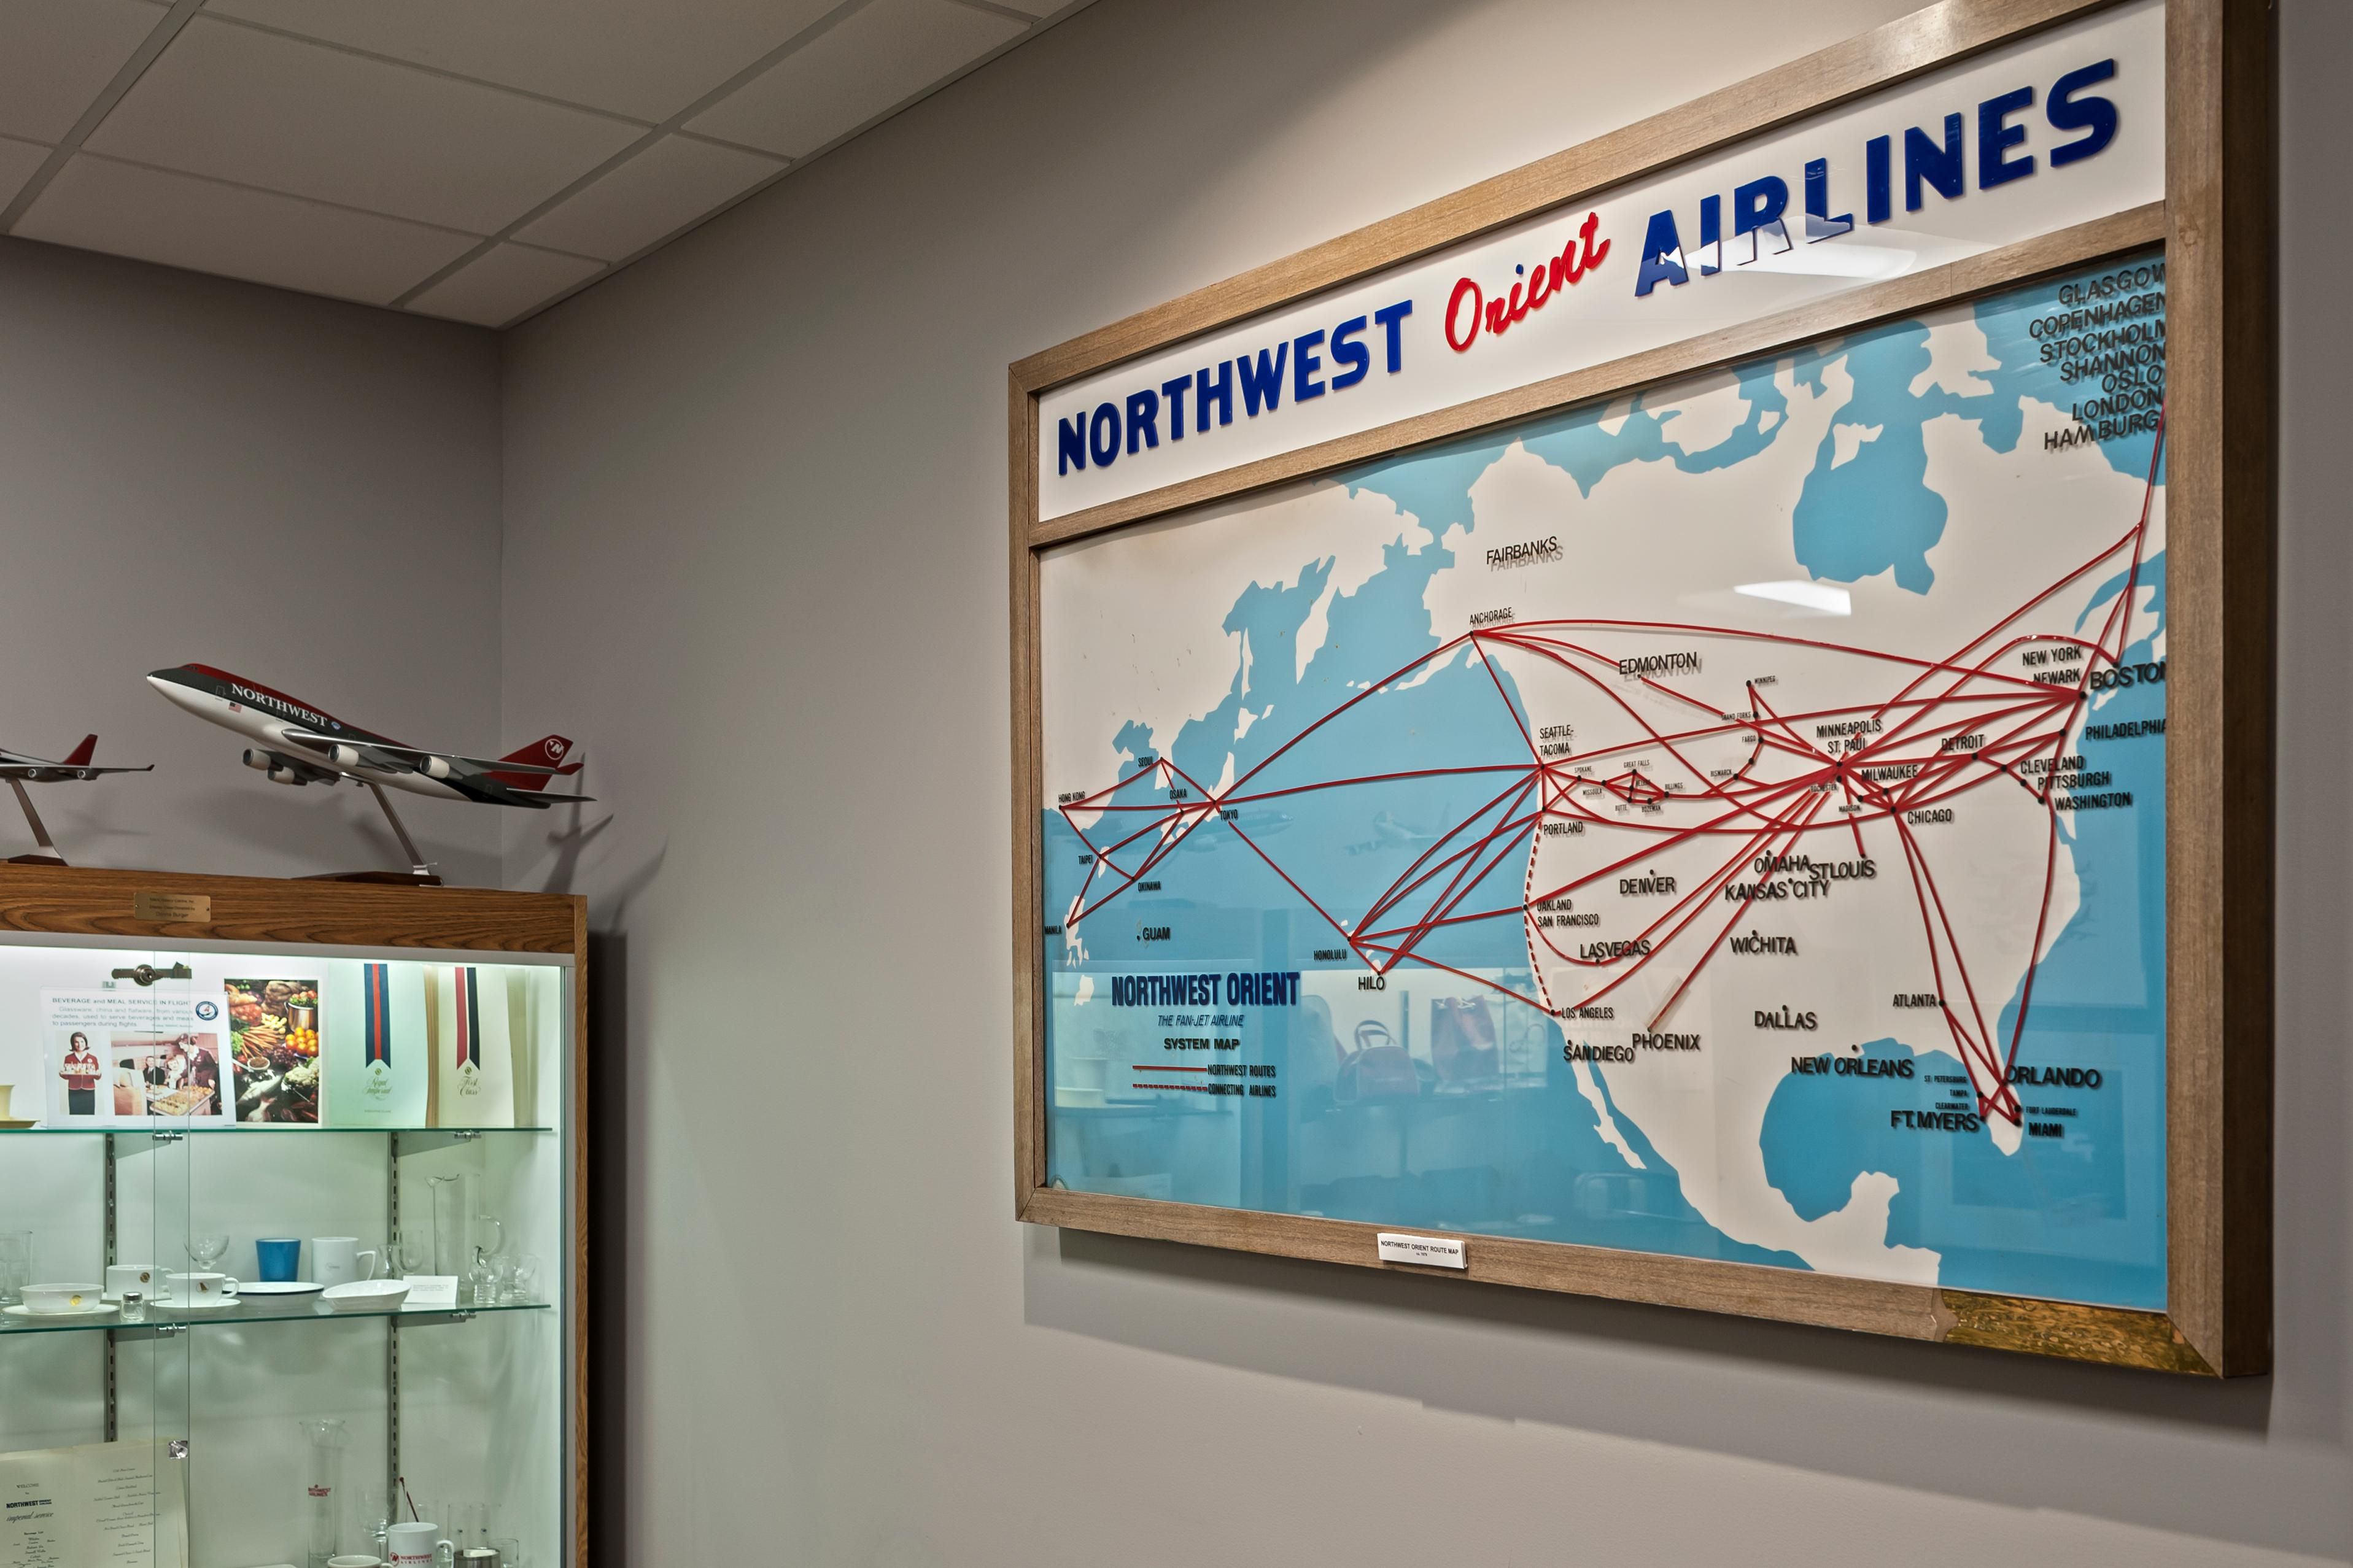 Northwest Airlines History Center located on the 3rd floor